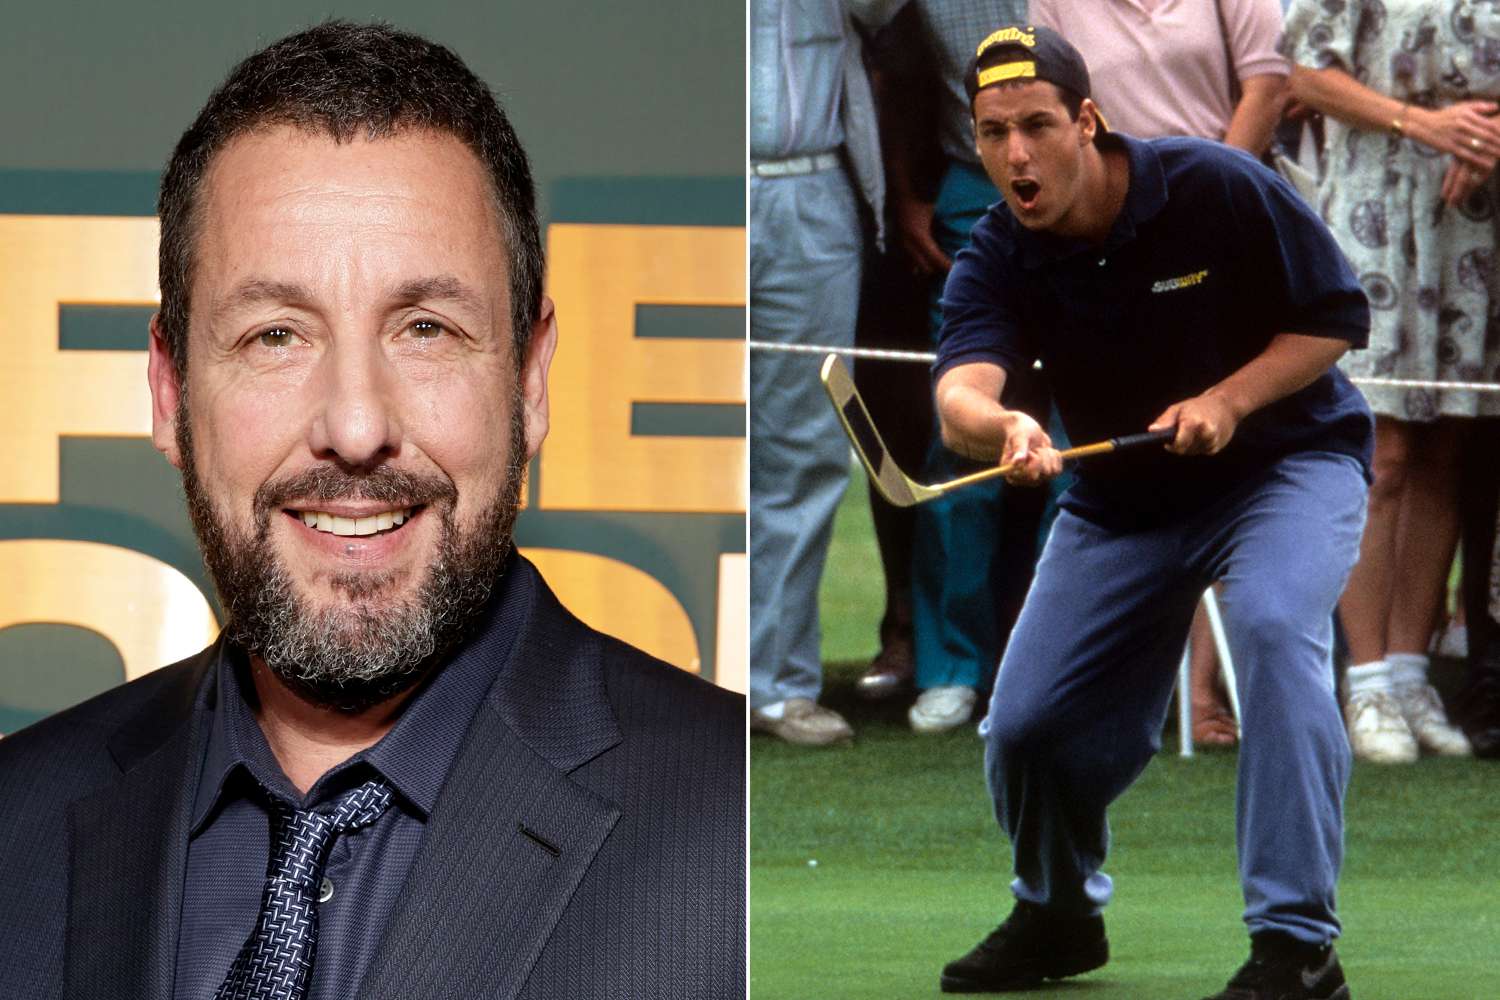 Adam Sandler Officially Returning for More “Happy Gilmore” as Sequel Is Confirmed